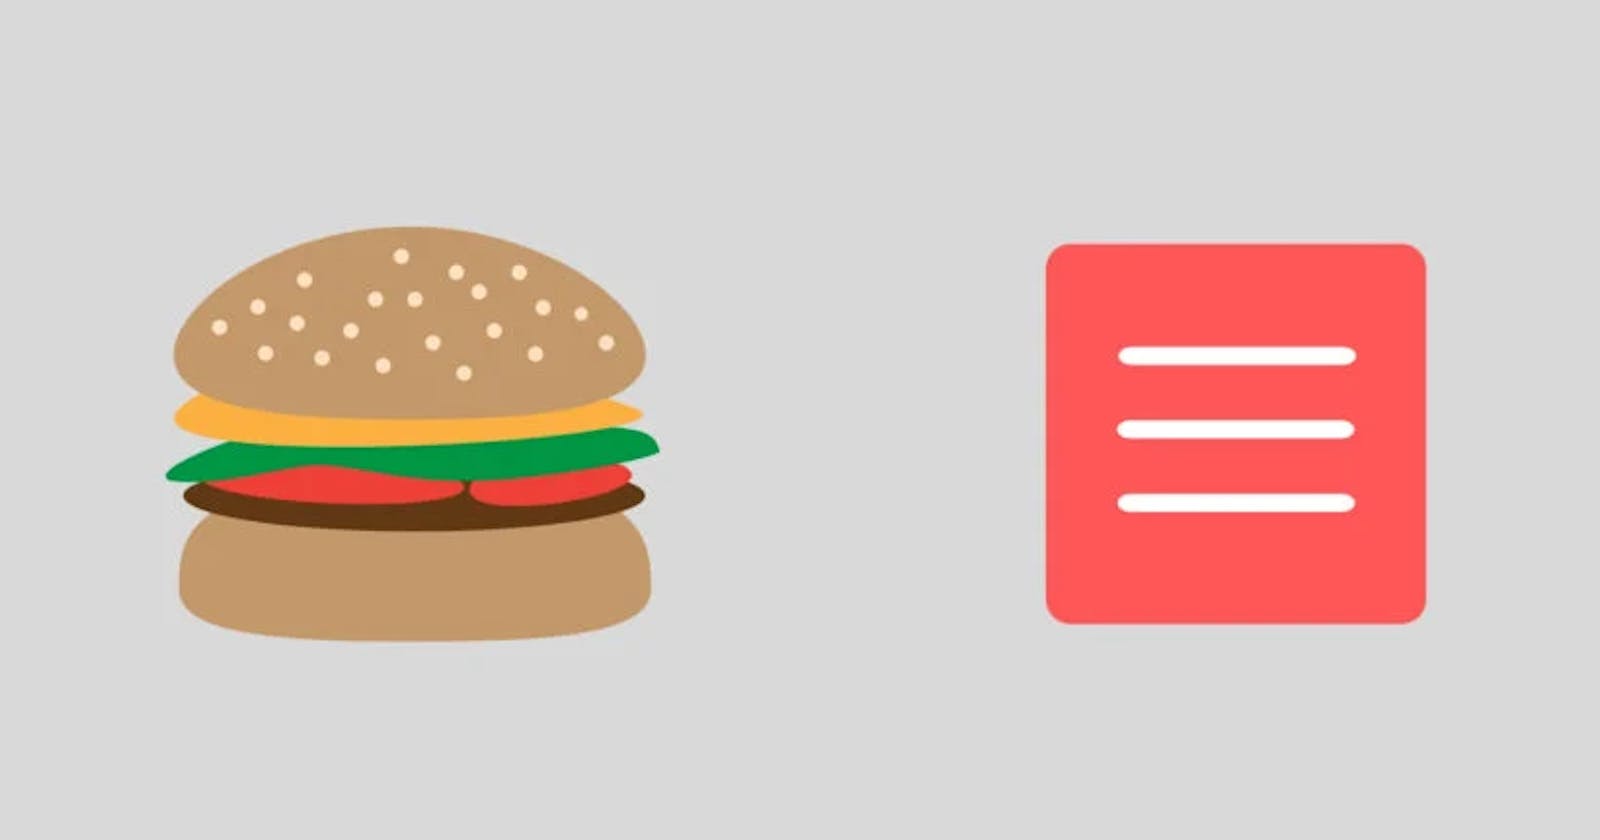 Building the World Simplest Hamburger with HTML and CSS